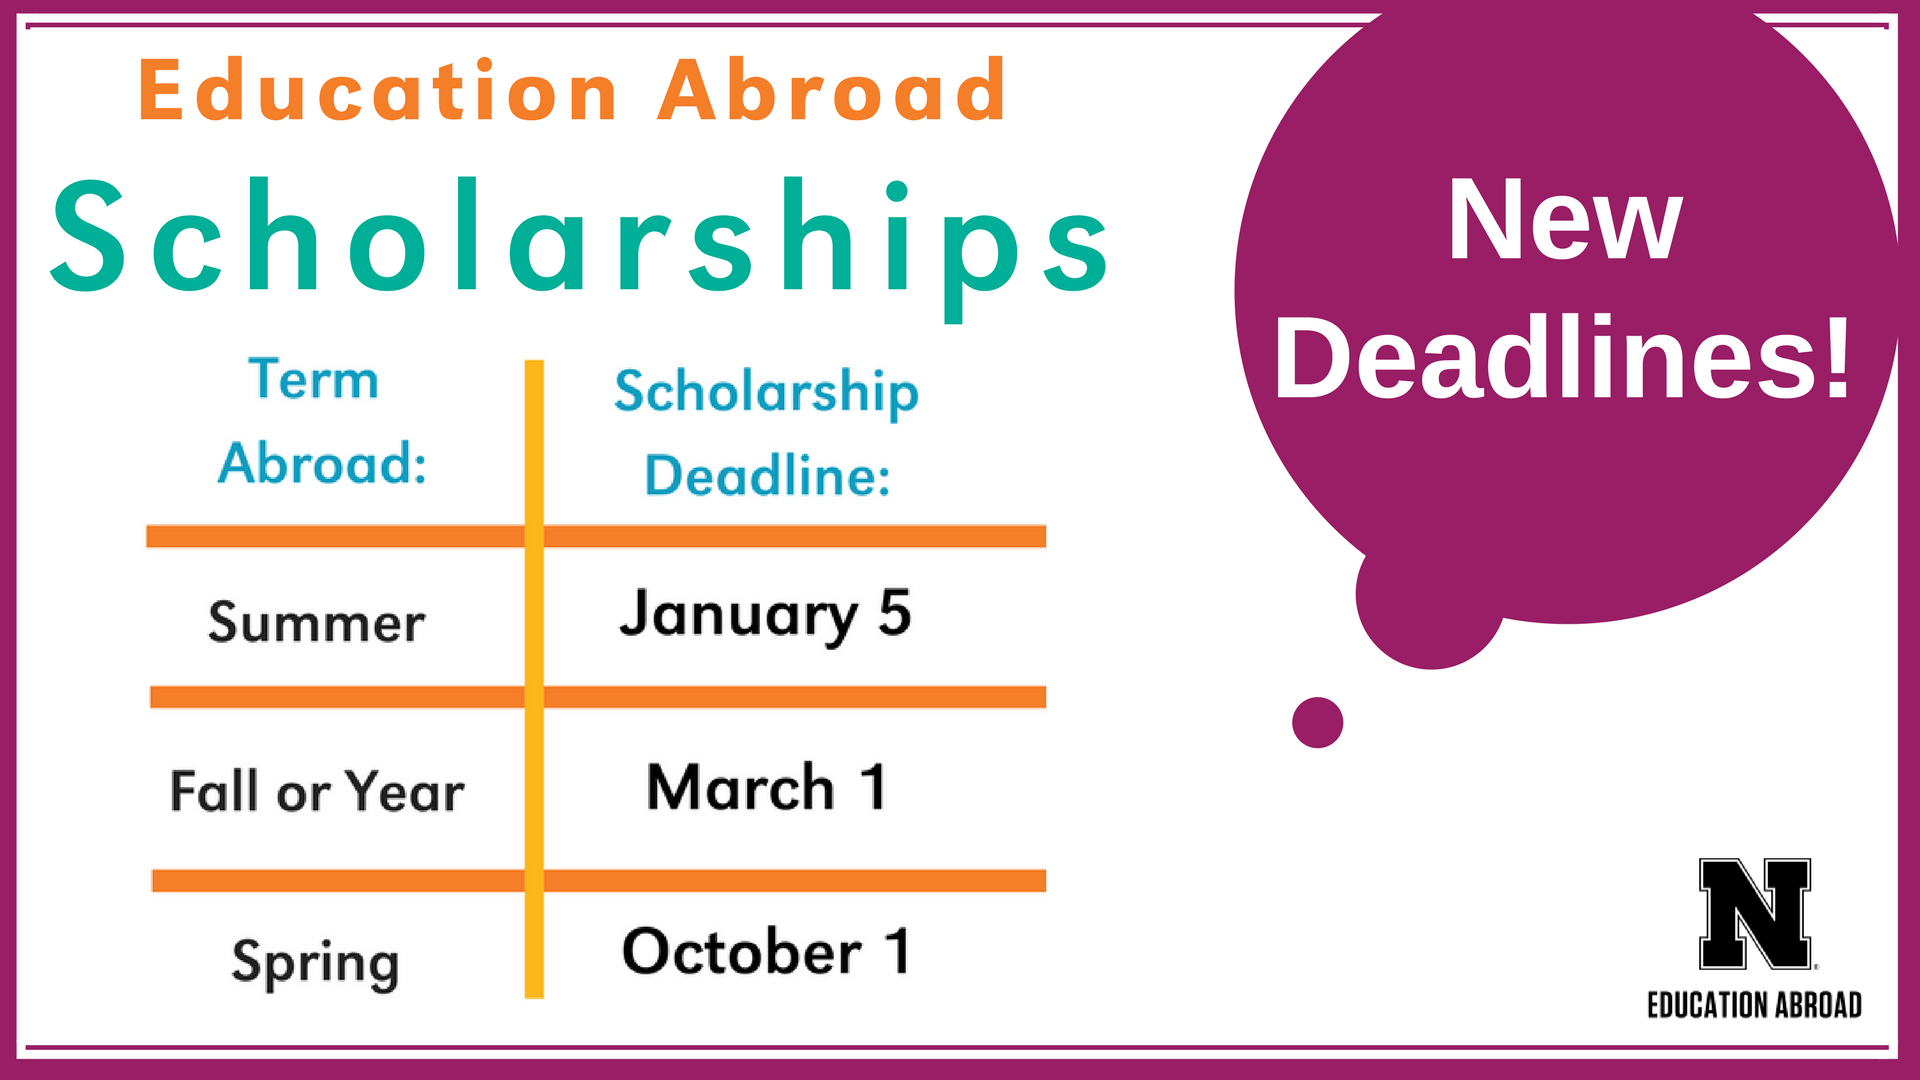 Education Abroad Scholarships NEW Deadlines! Announce University